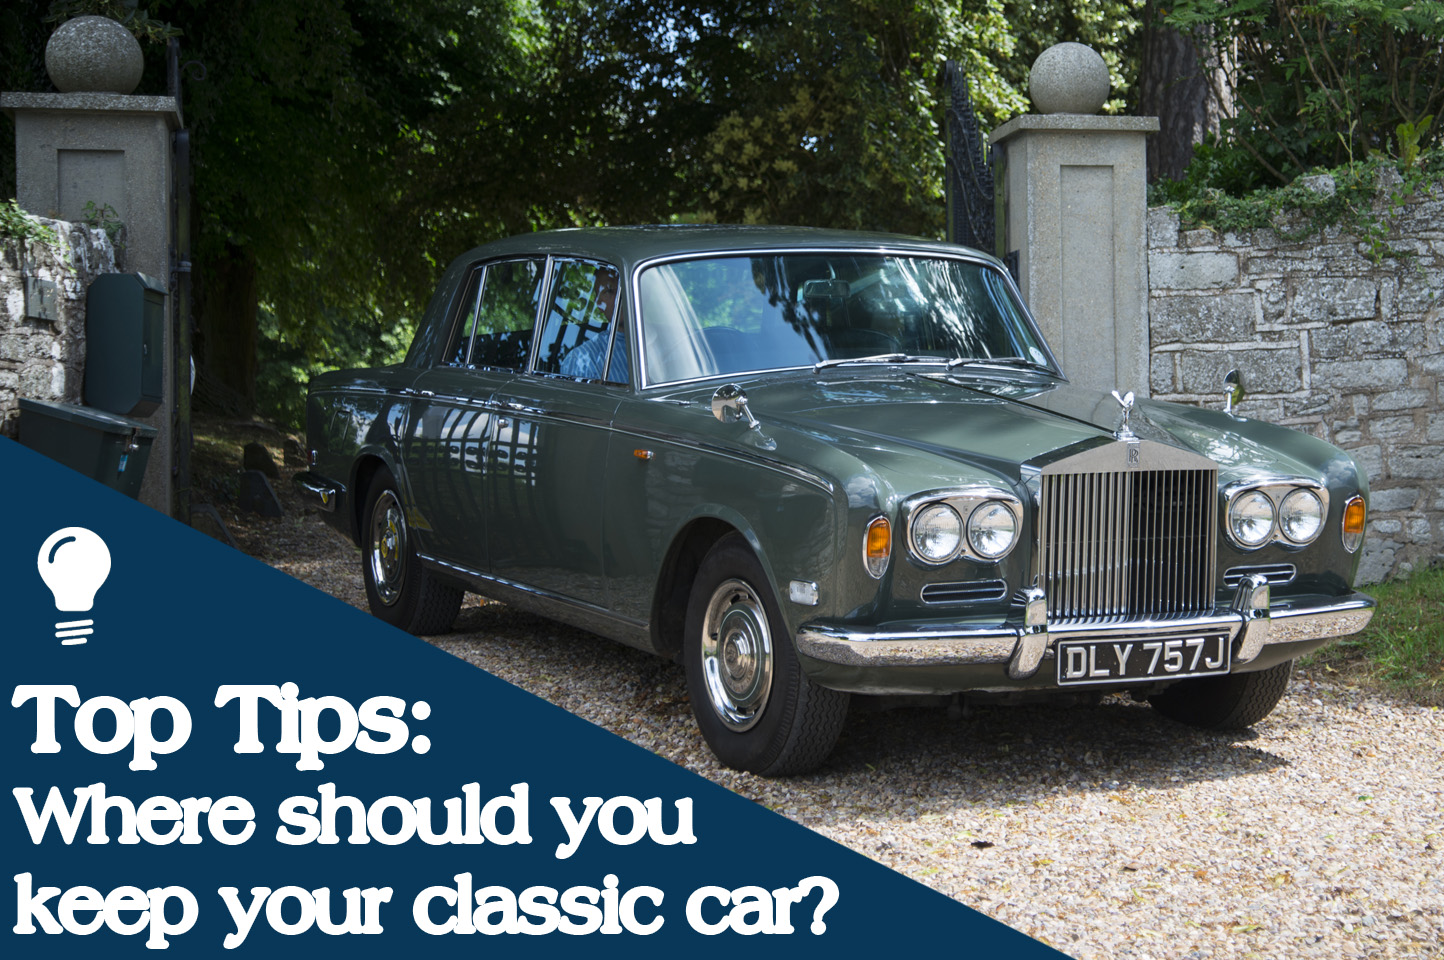 Top Tips: Where should you keep your classic car?